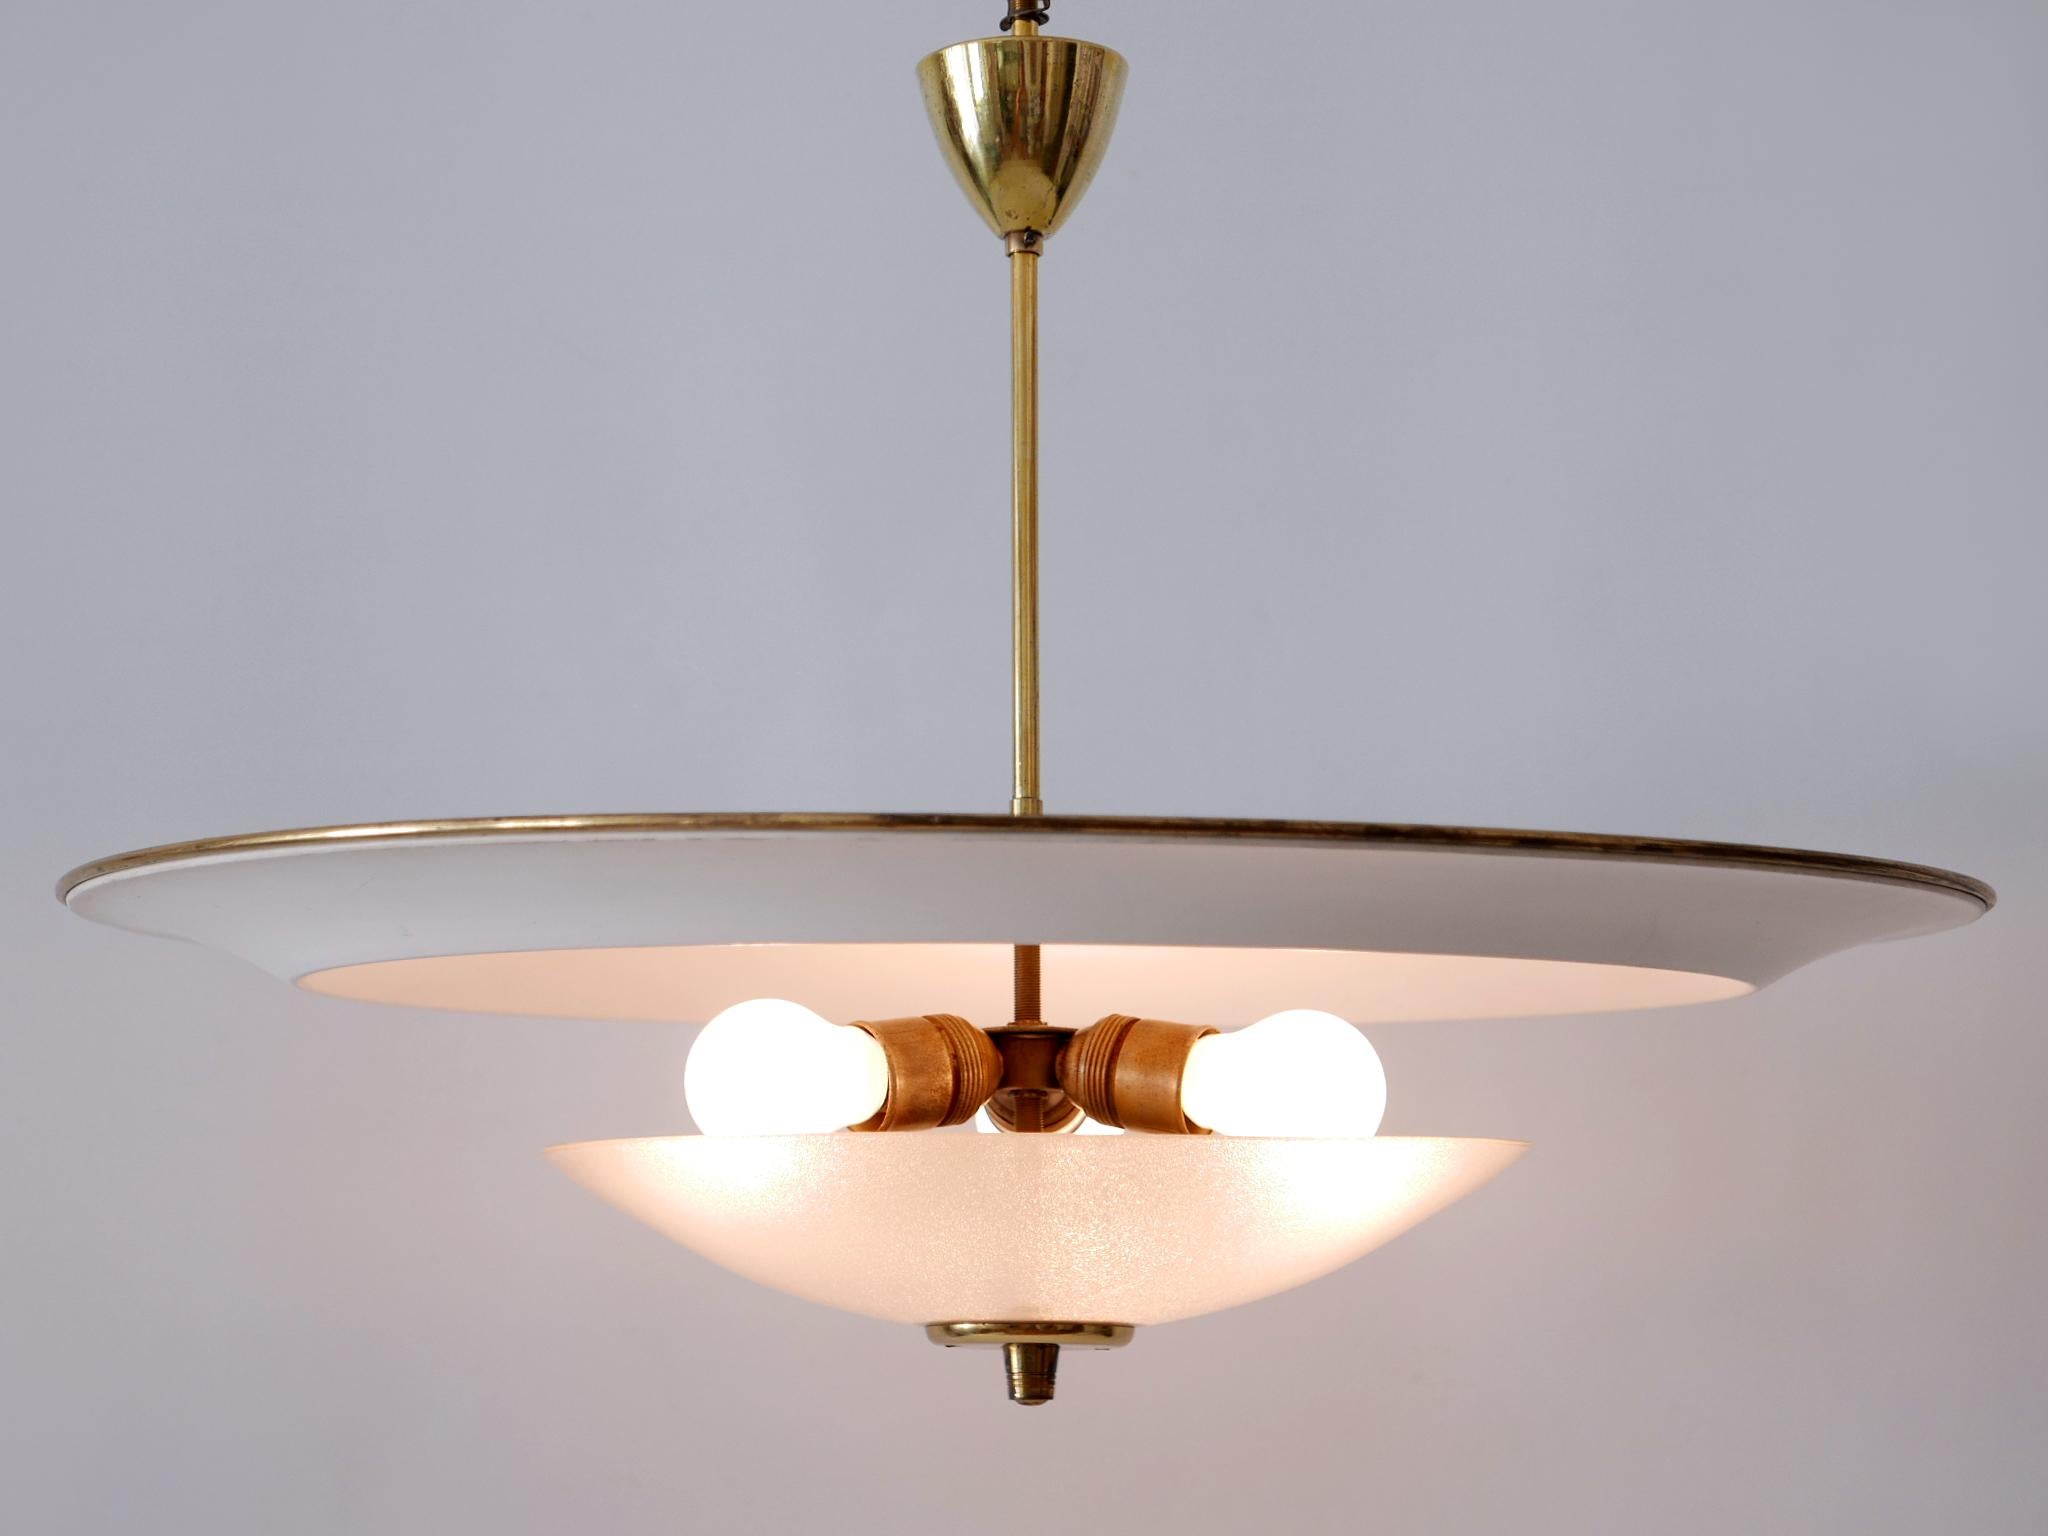 Large Mid-Century Modern 'Ufo' Ceiling Light or Pendant Lamp Germany 1950s № 1 For Sale 5